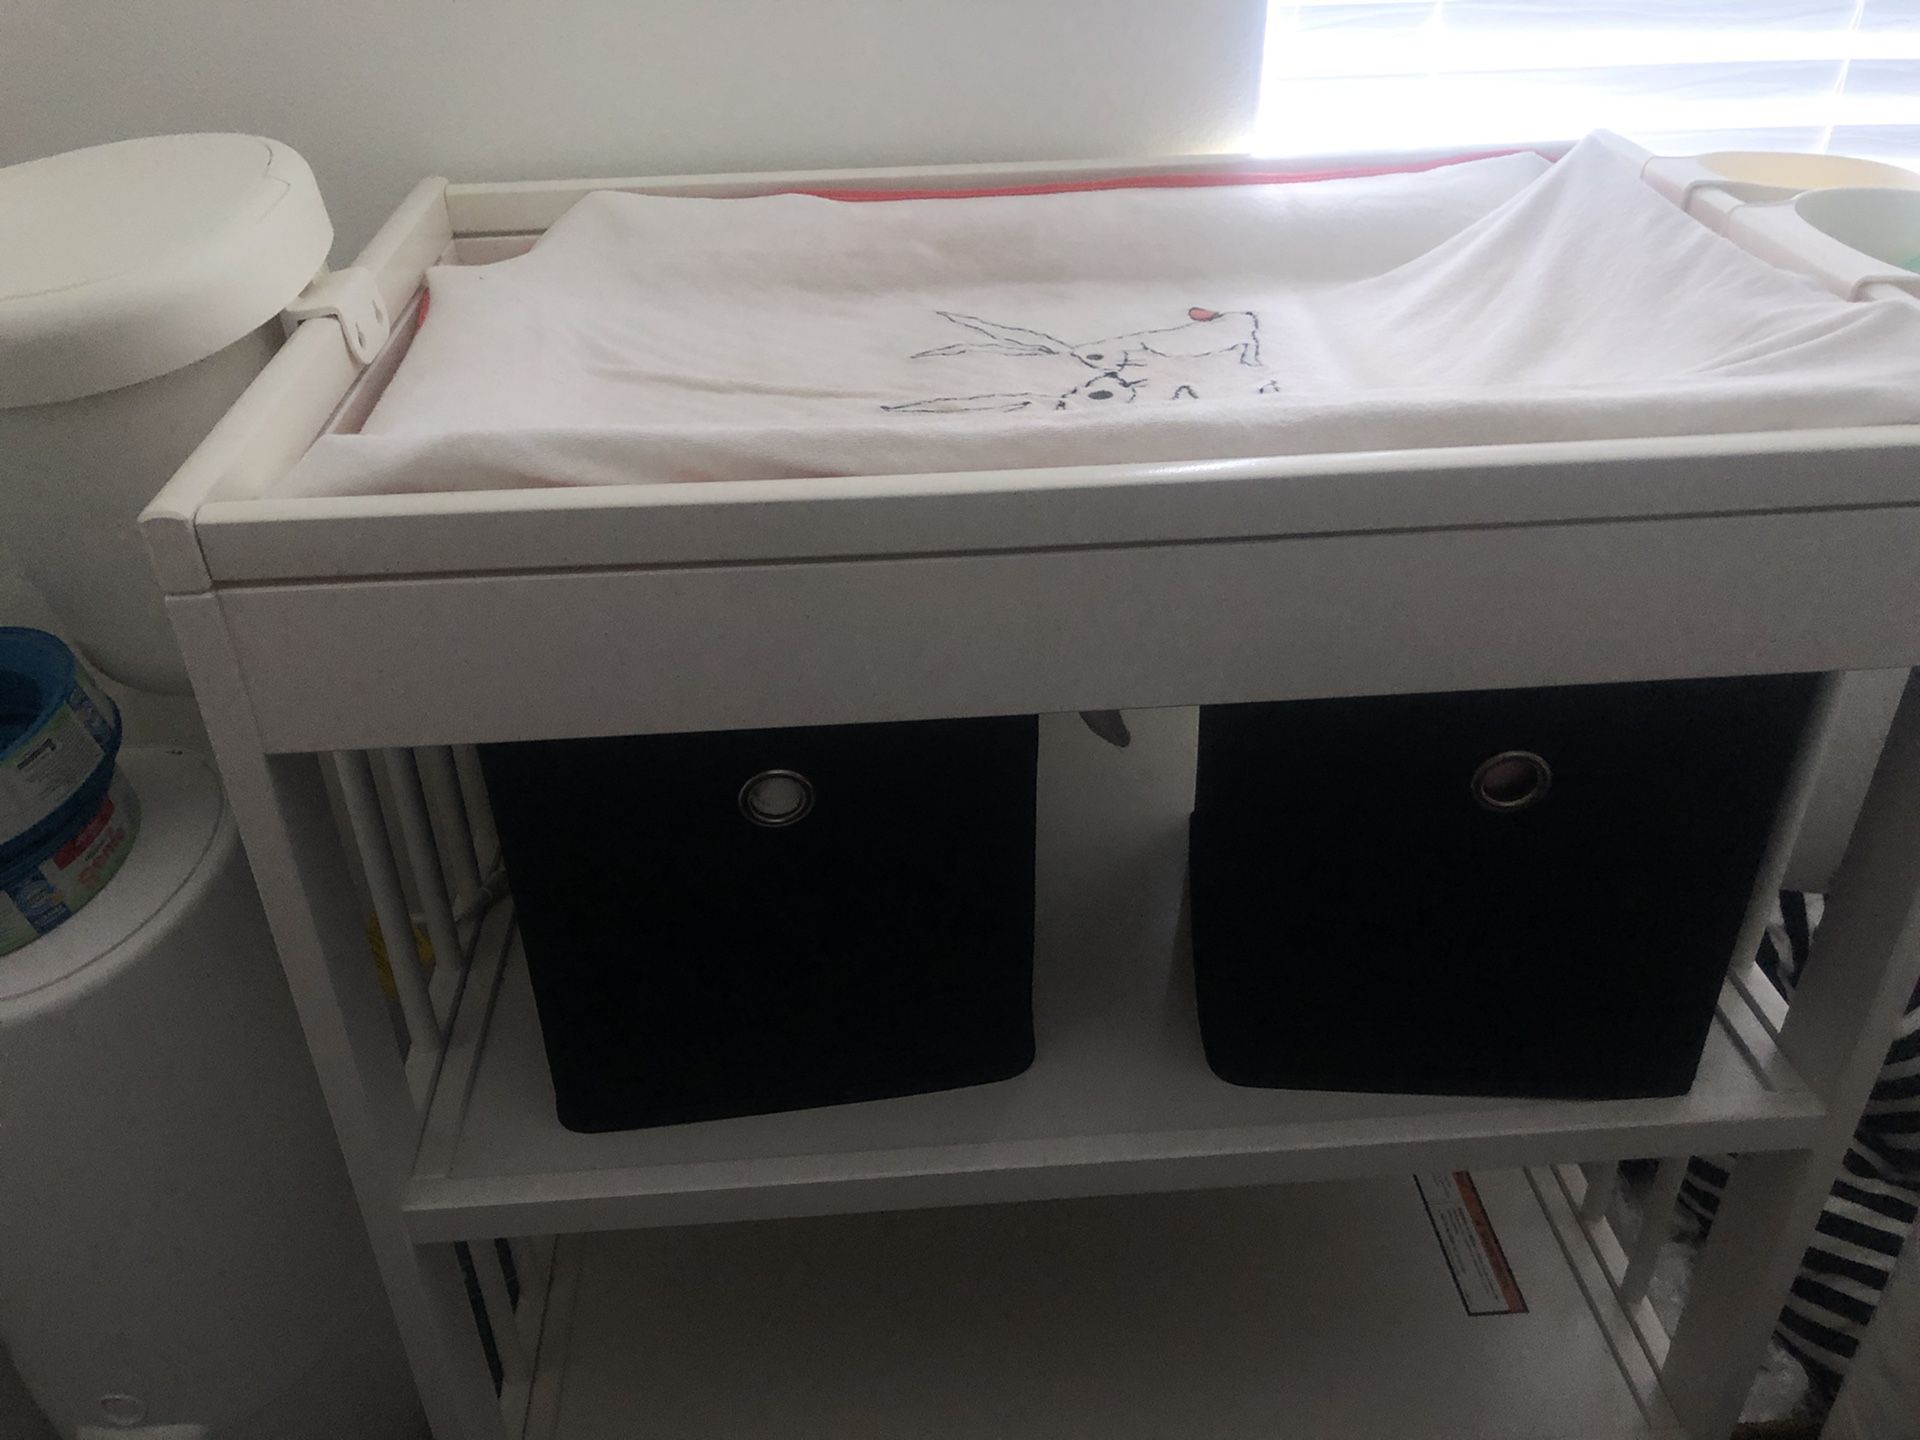 IKEA changing table